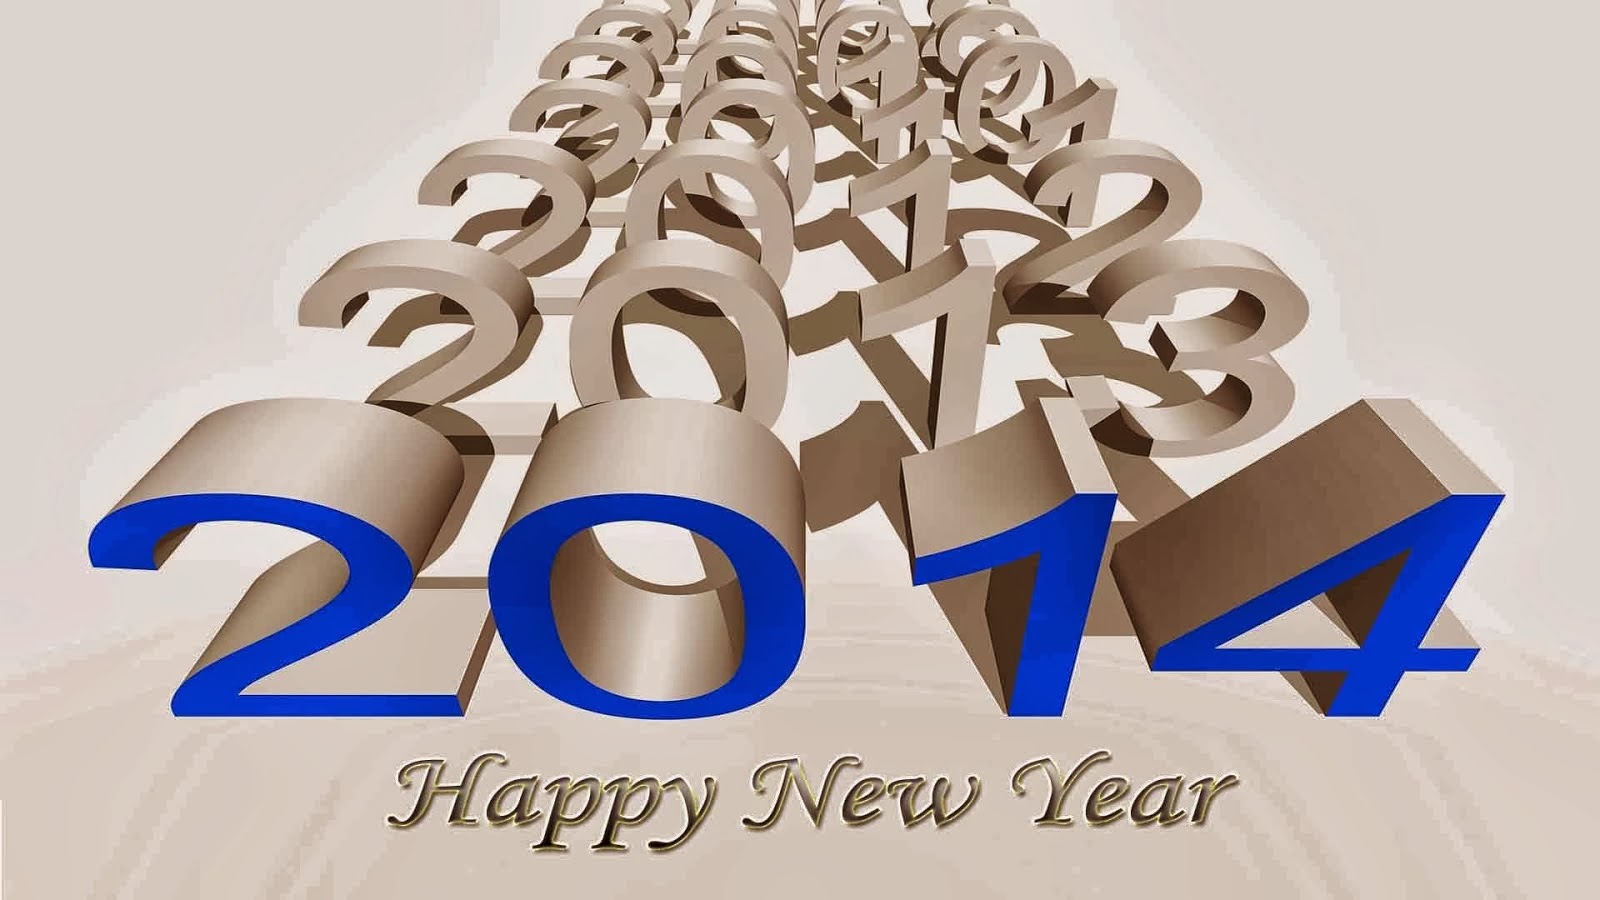 Animated Happy New Year 2014 Greetings Hd Wallpaper - Wallpaper - HD Wallpaper 